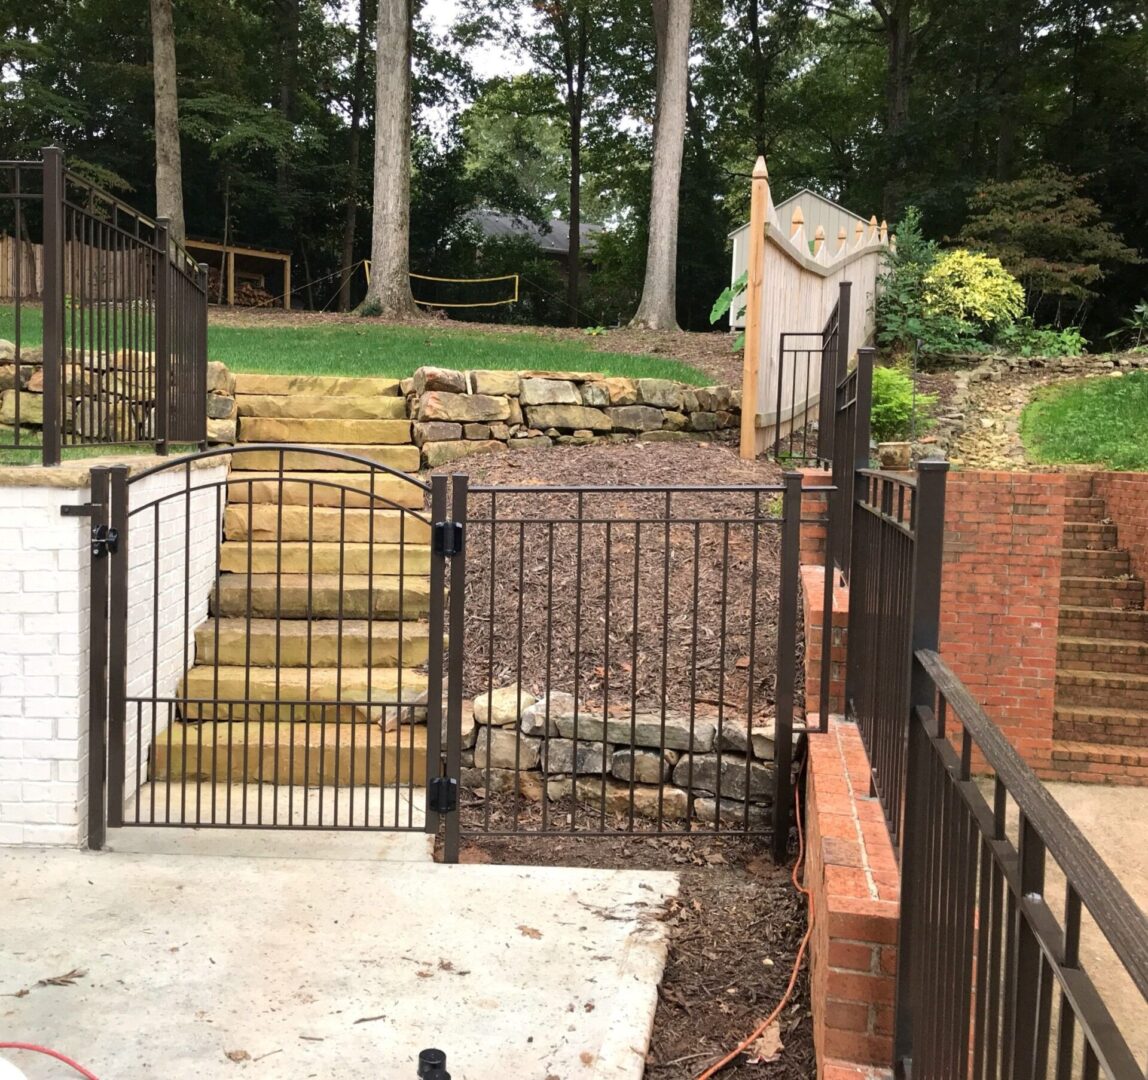 A view of a fence and steps from the ground up.